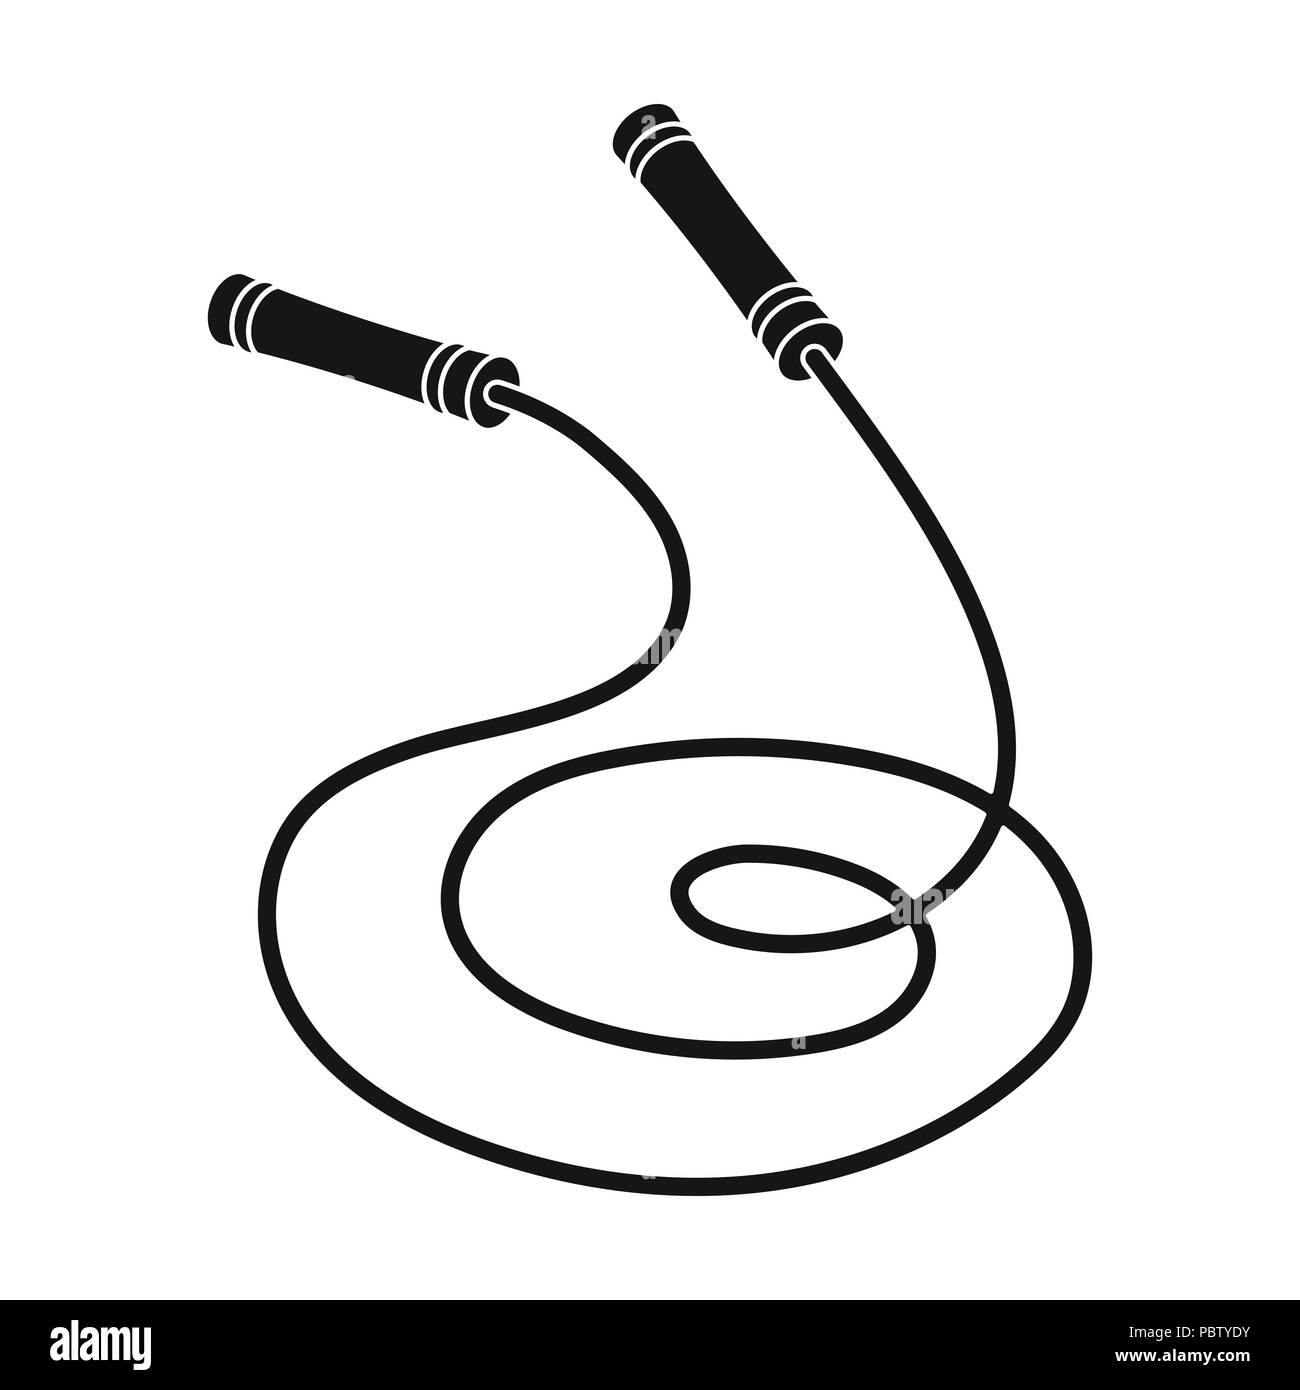 Jump rope icon in black style isolated on white background. Boxing